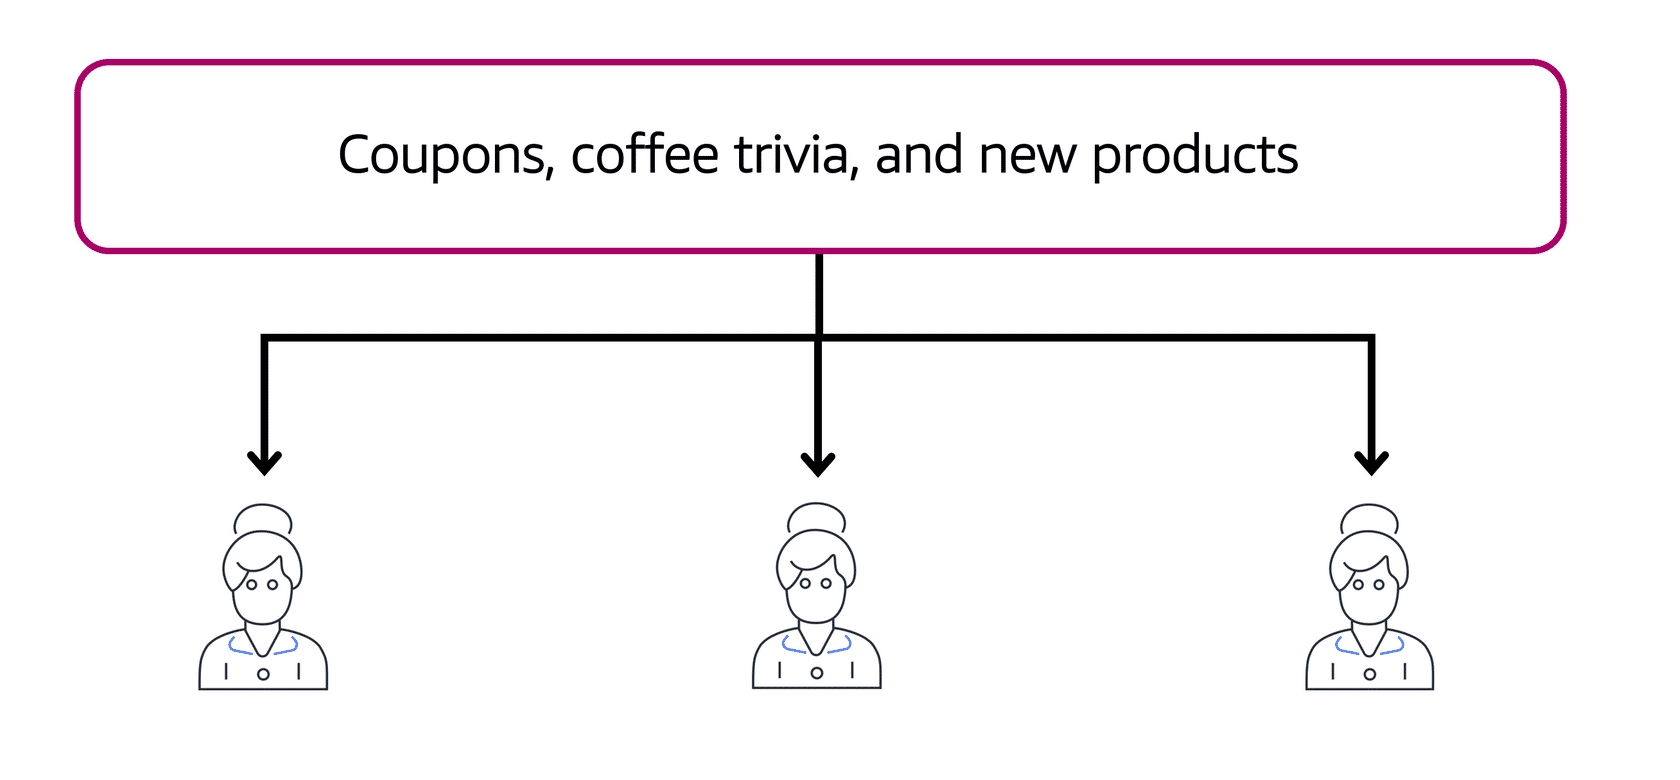 Three people icons with arrows pointing to them with the words Coupons, coffee trivia, and new products above them